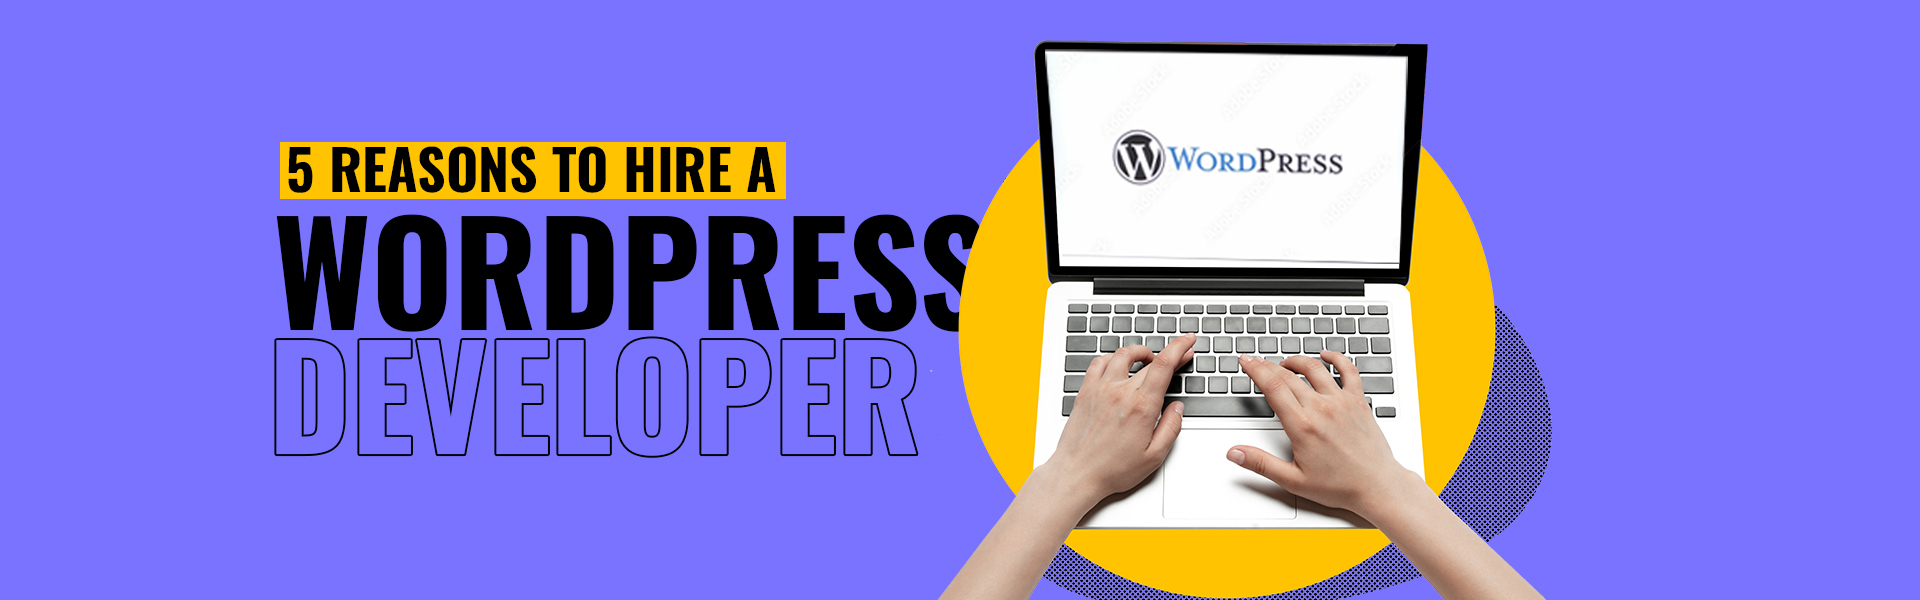 CC-Blog_5-Reasons-to-Hire-a-WordPress-Developer-for-Your-Business_main-banner